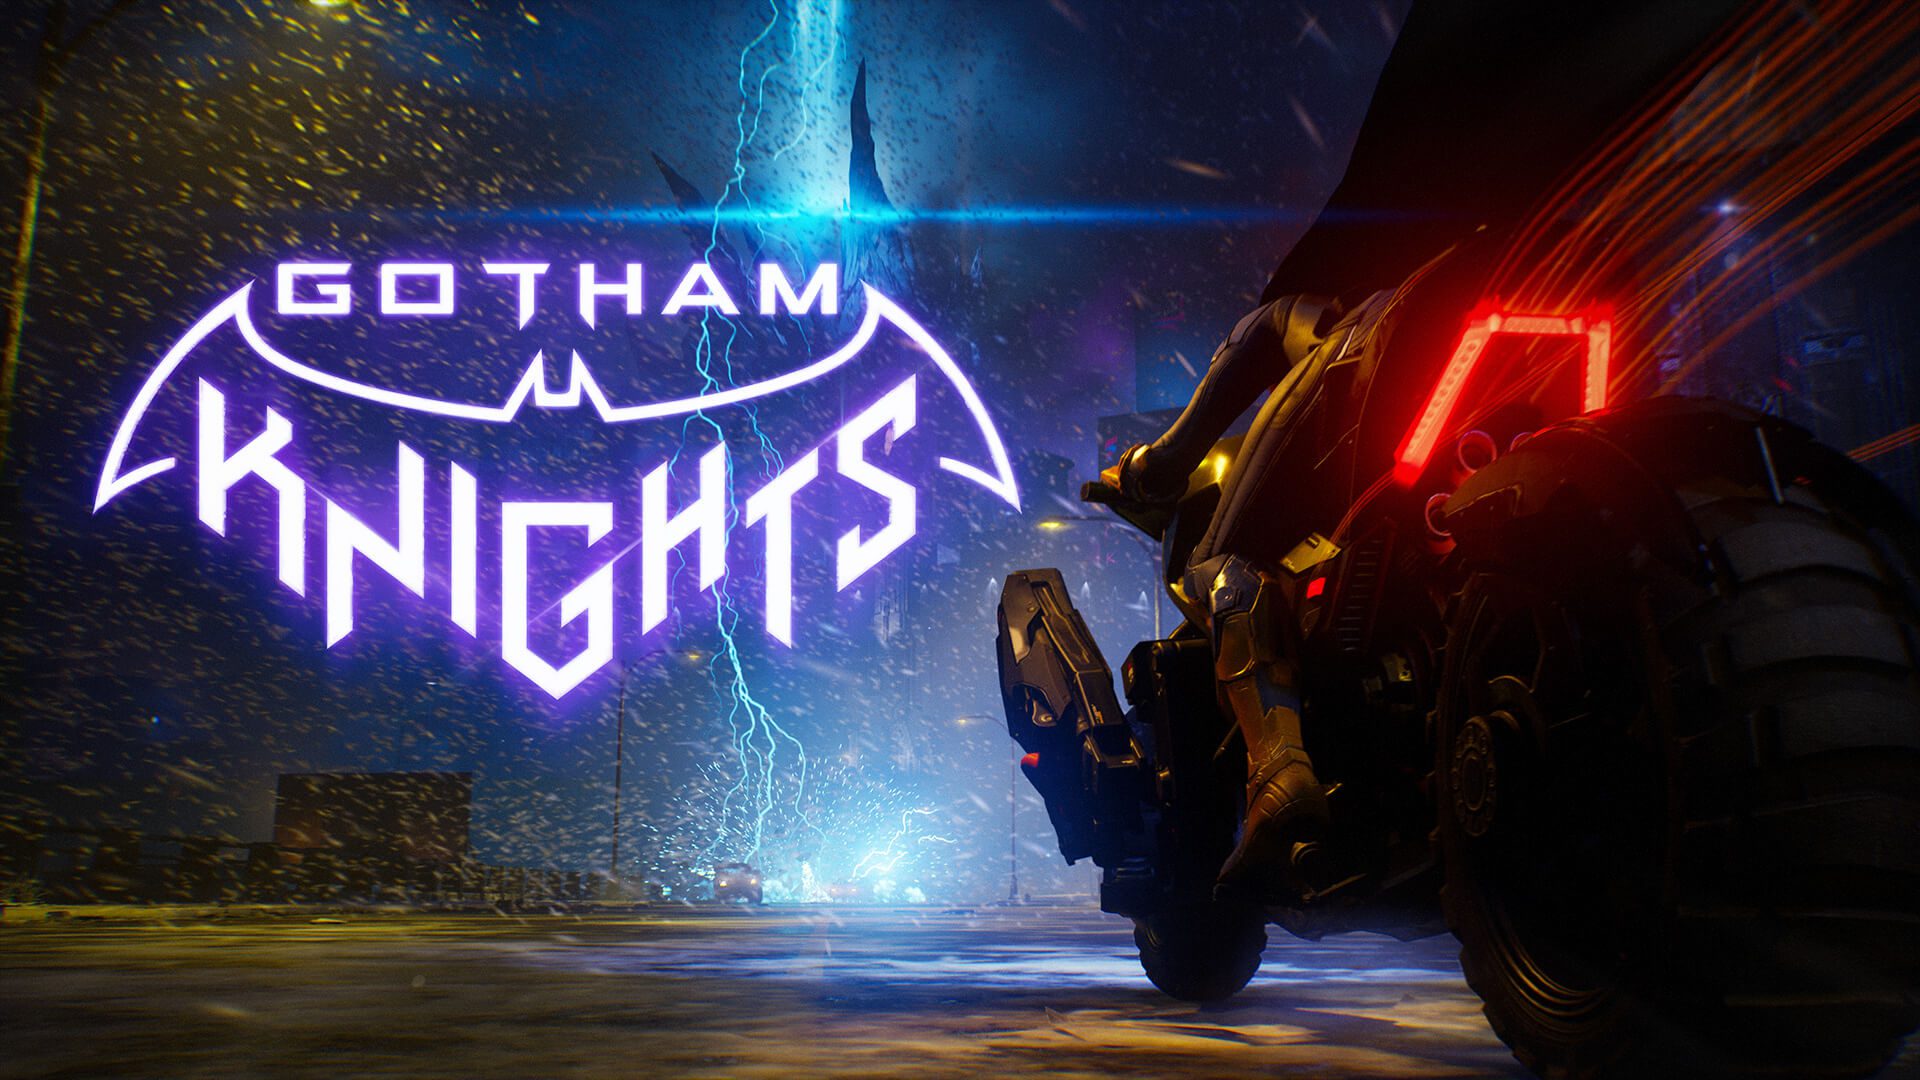 Gotham Knights is not an RPG where you start from scratch